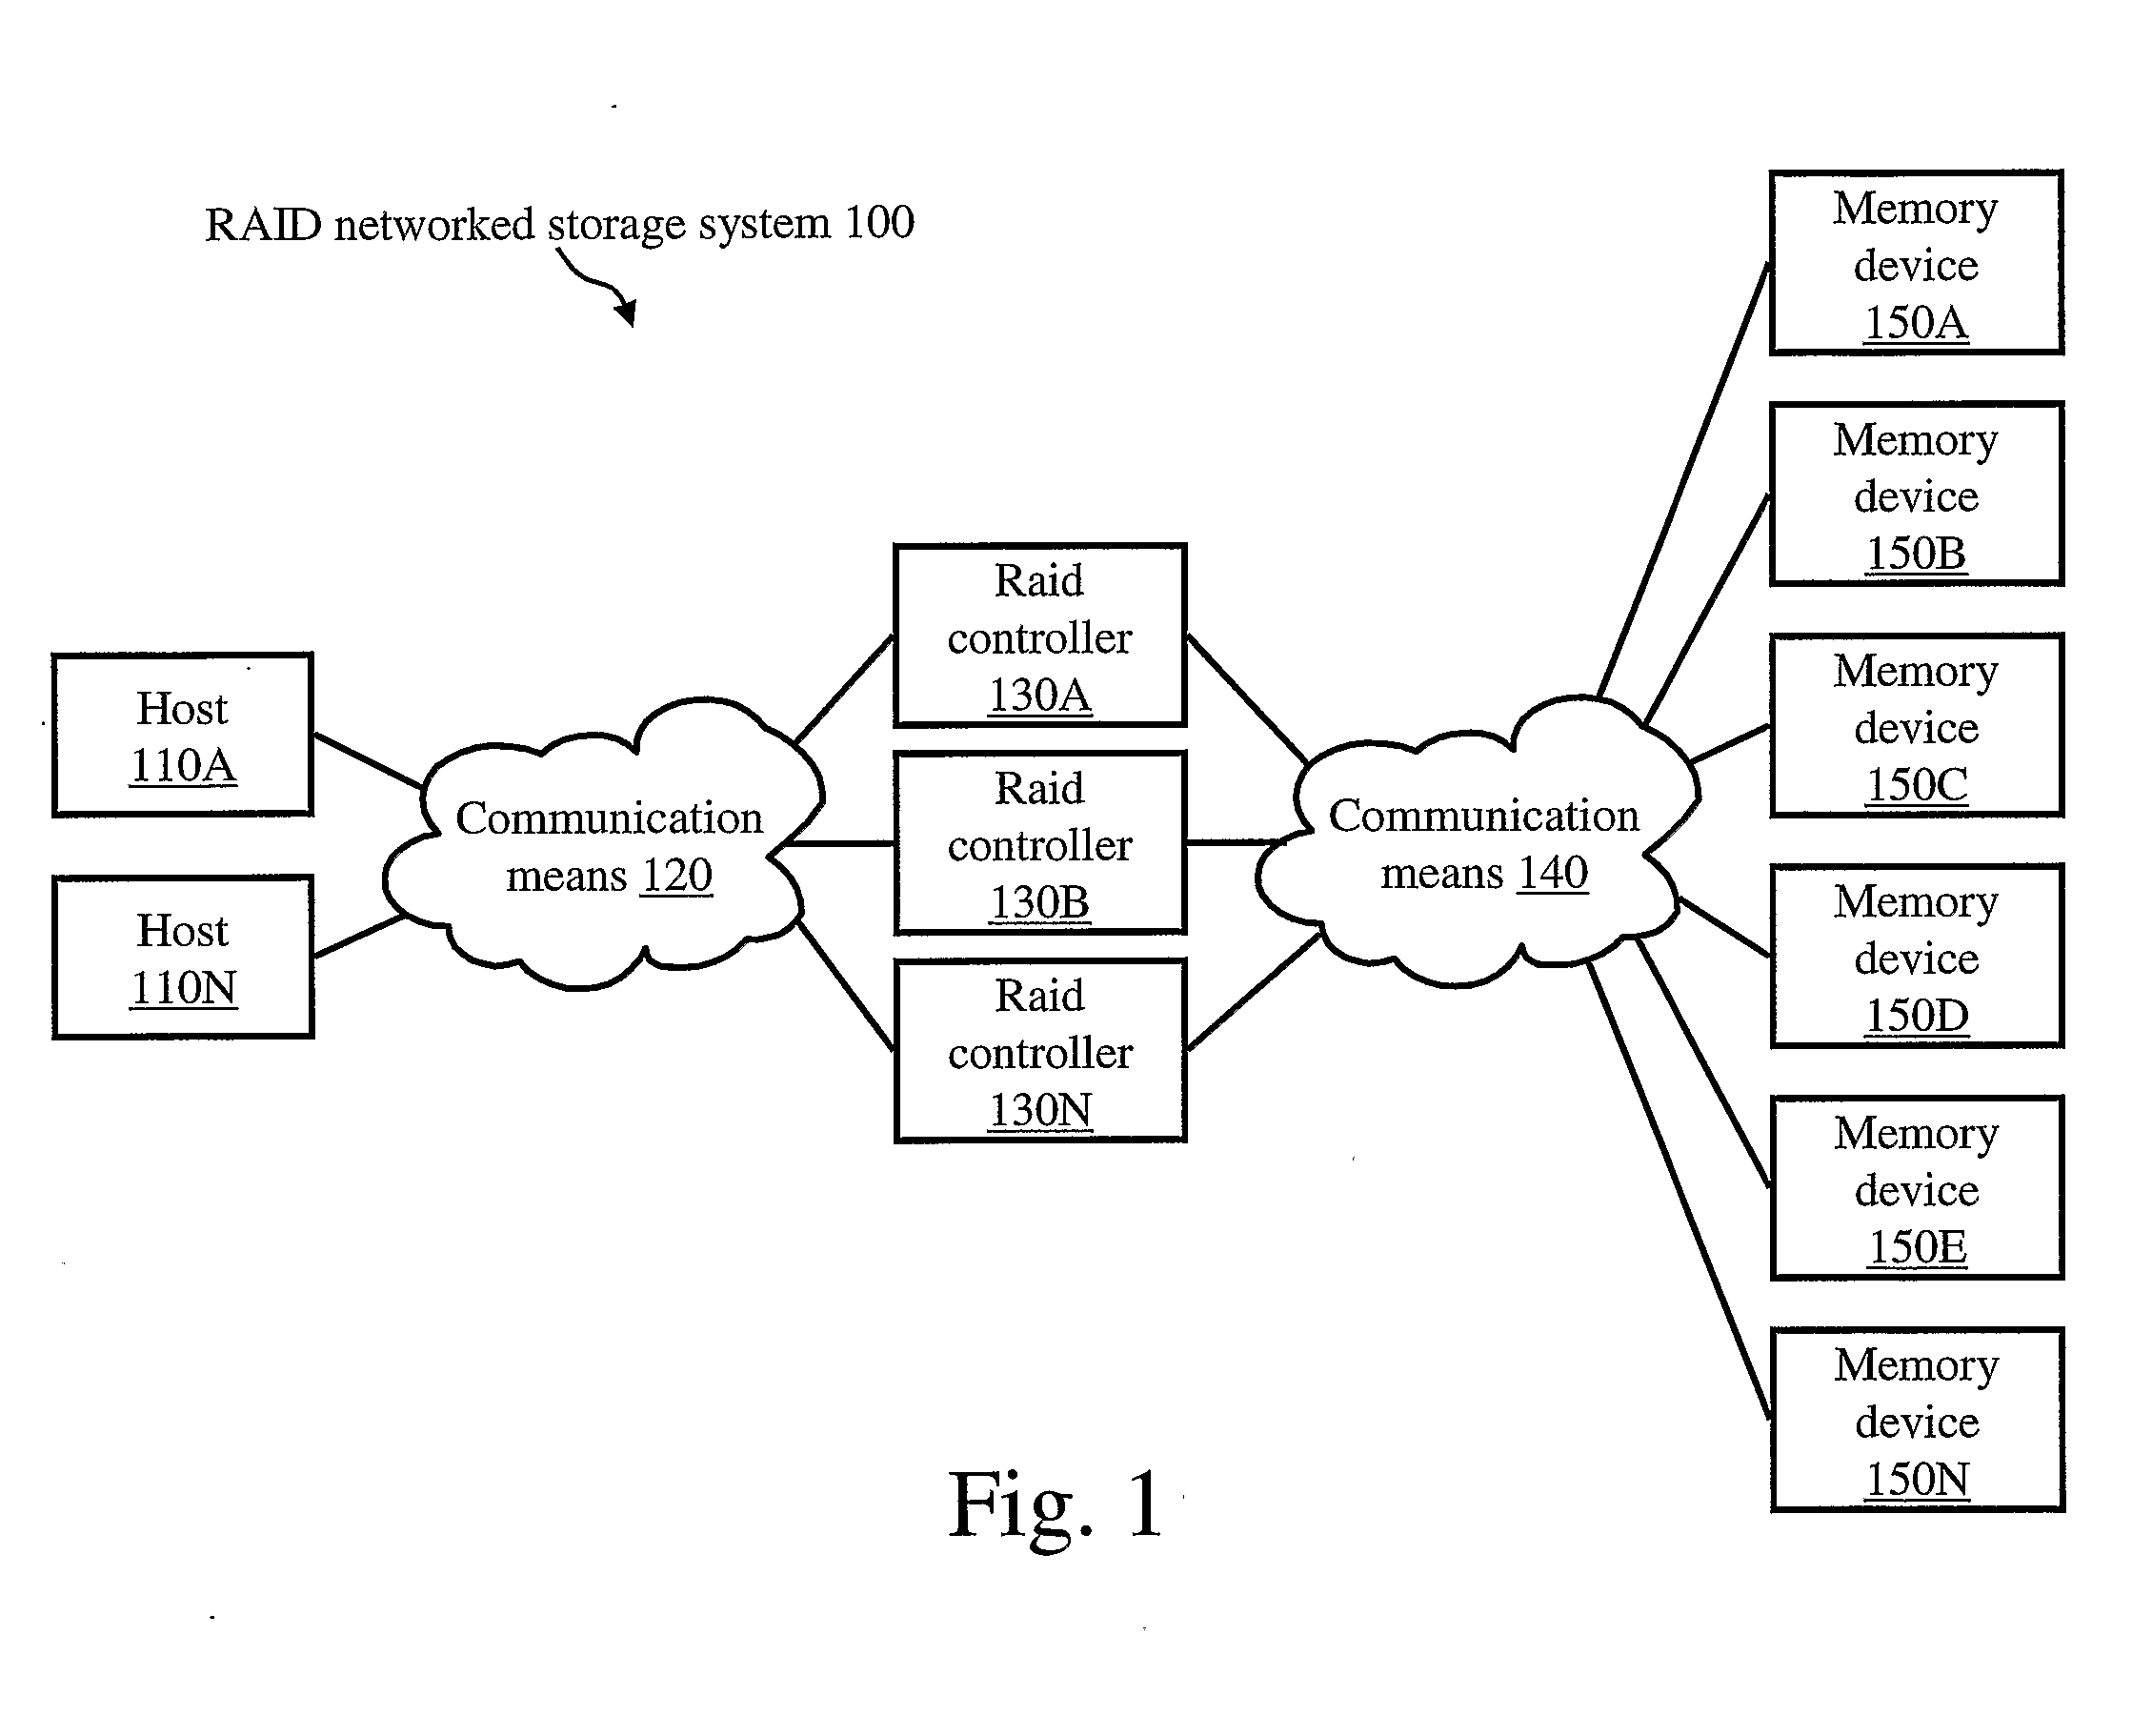 System and Method for Network Performance Monitoring and Predictive Failure Analysis